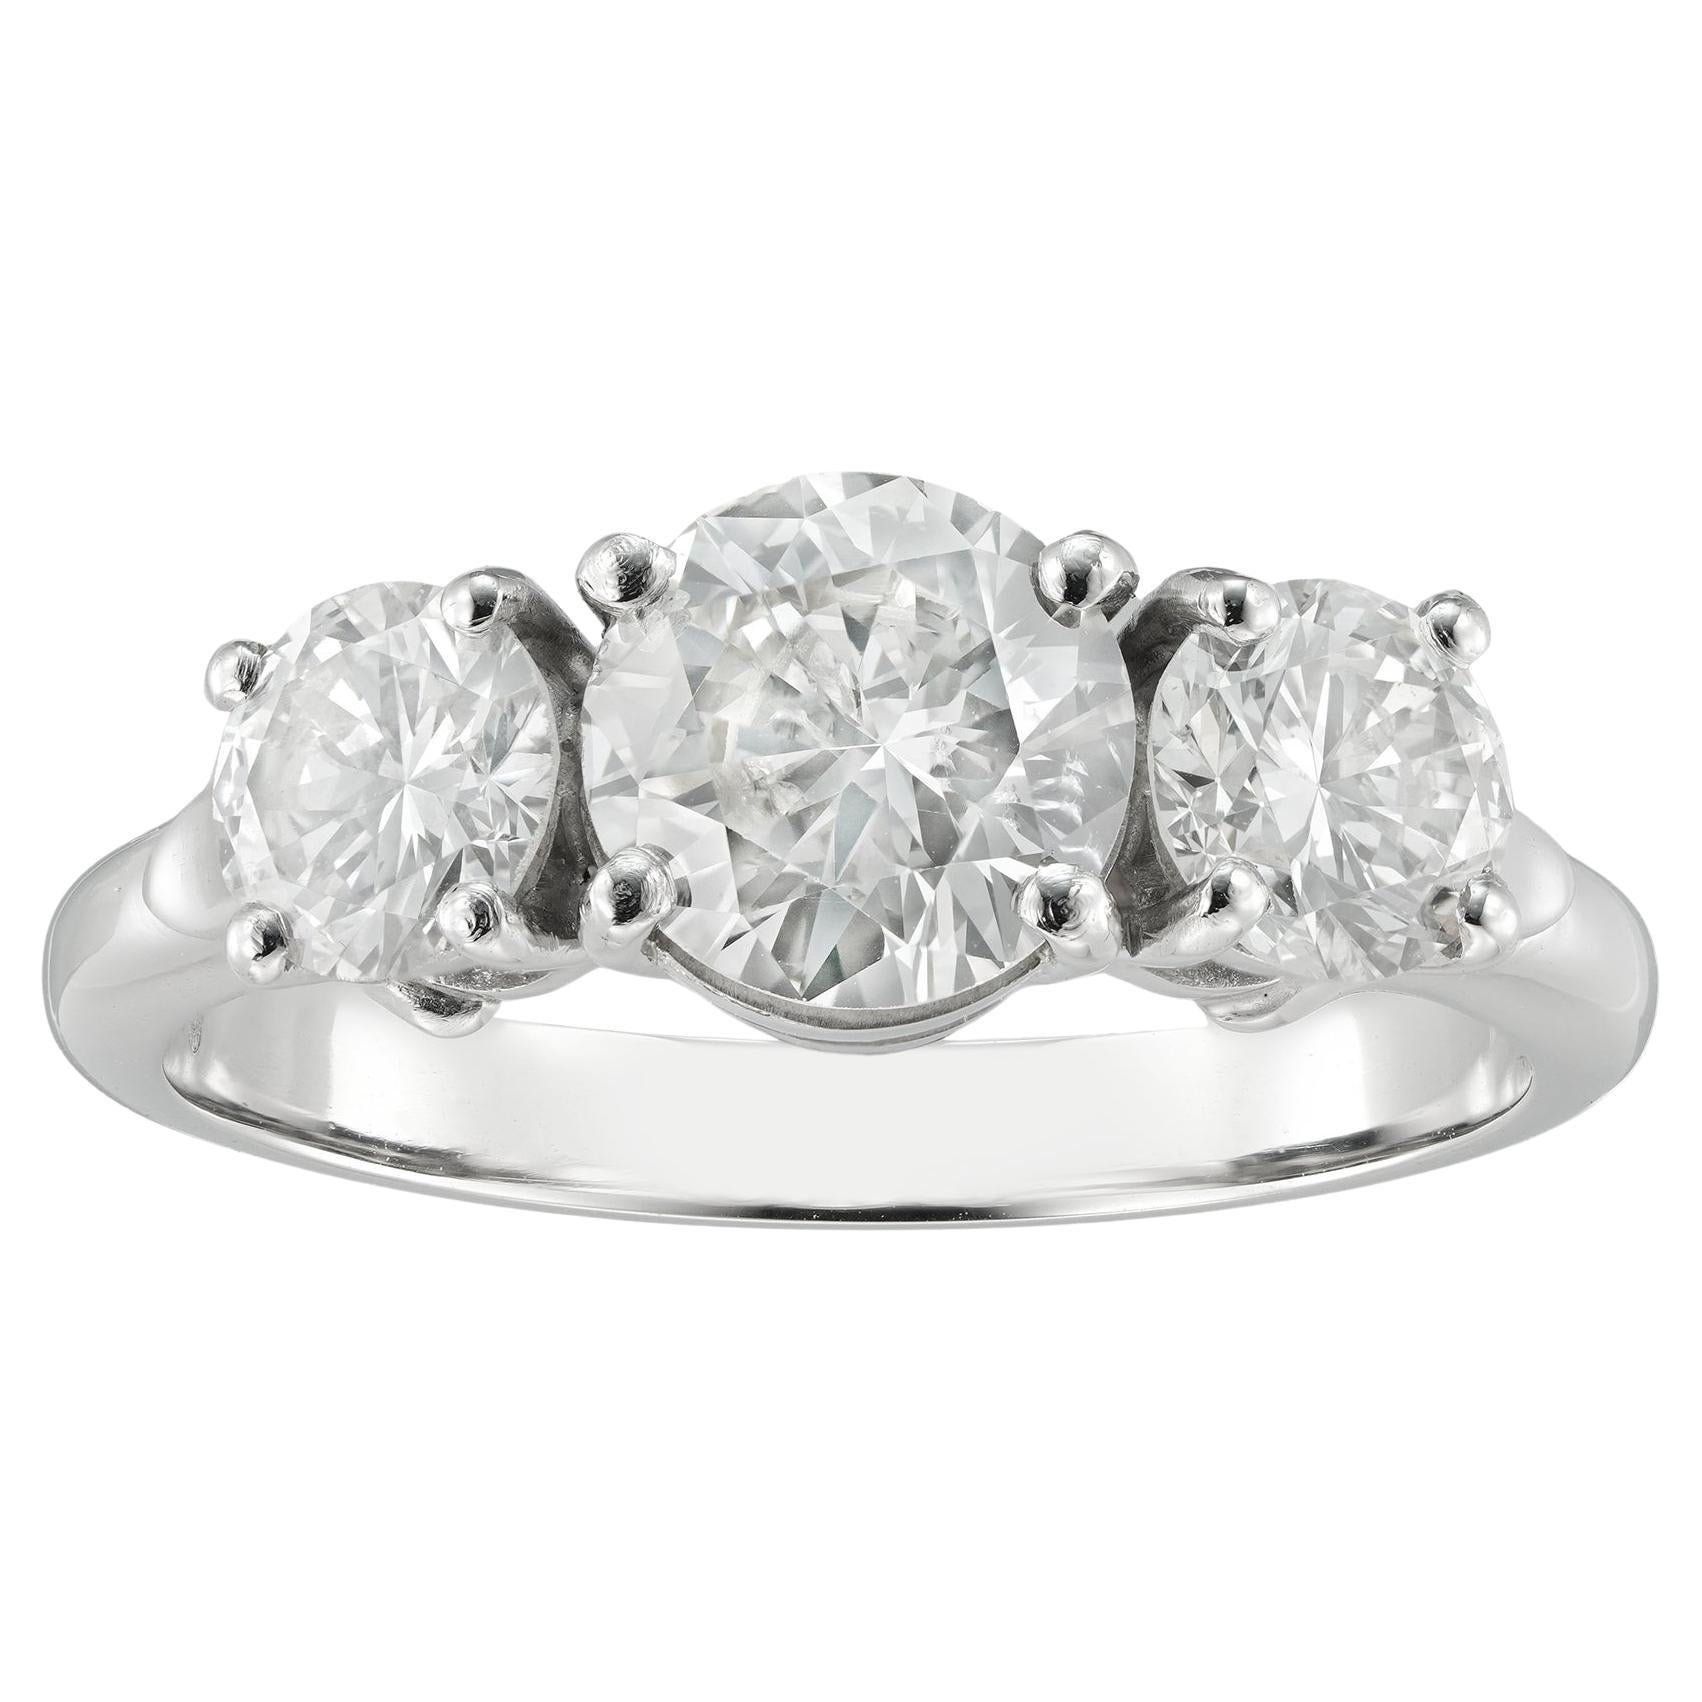 A three-stone diamond ring For Sale